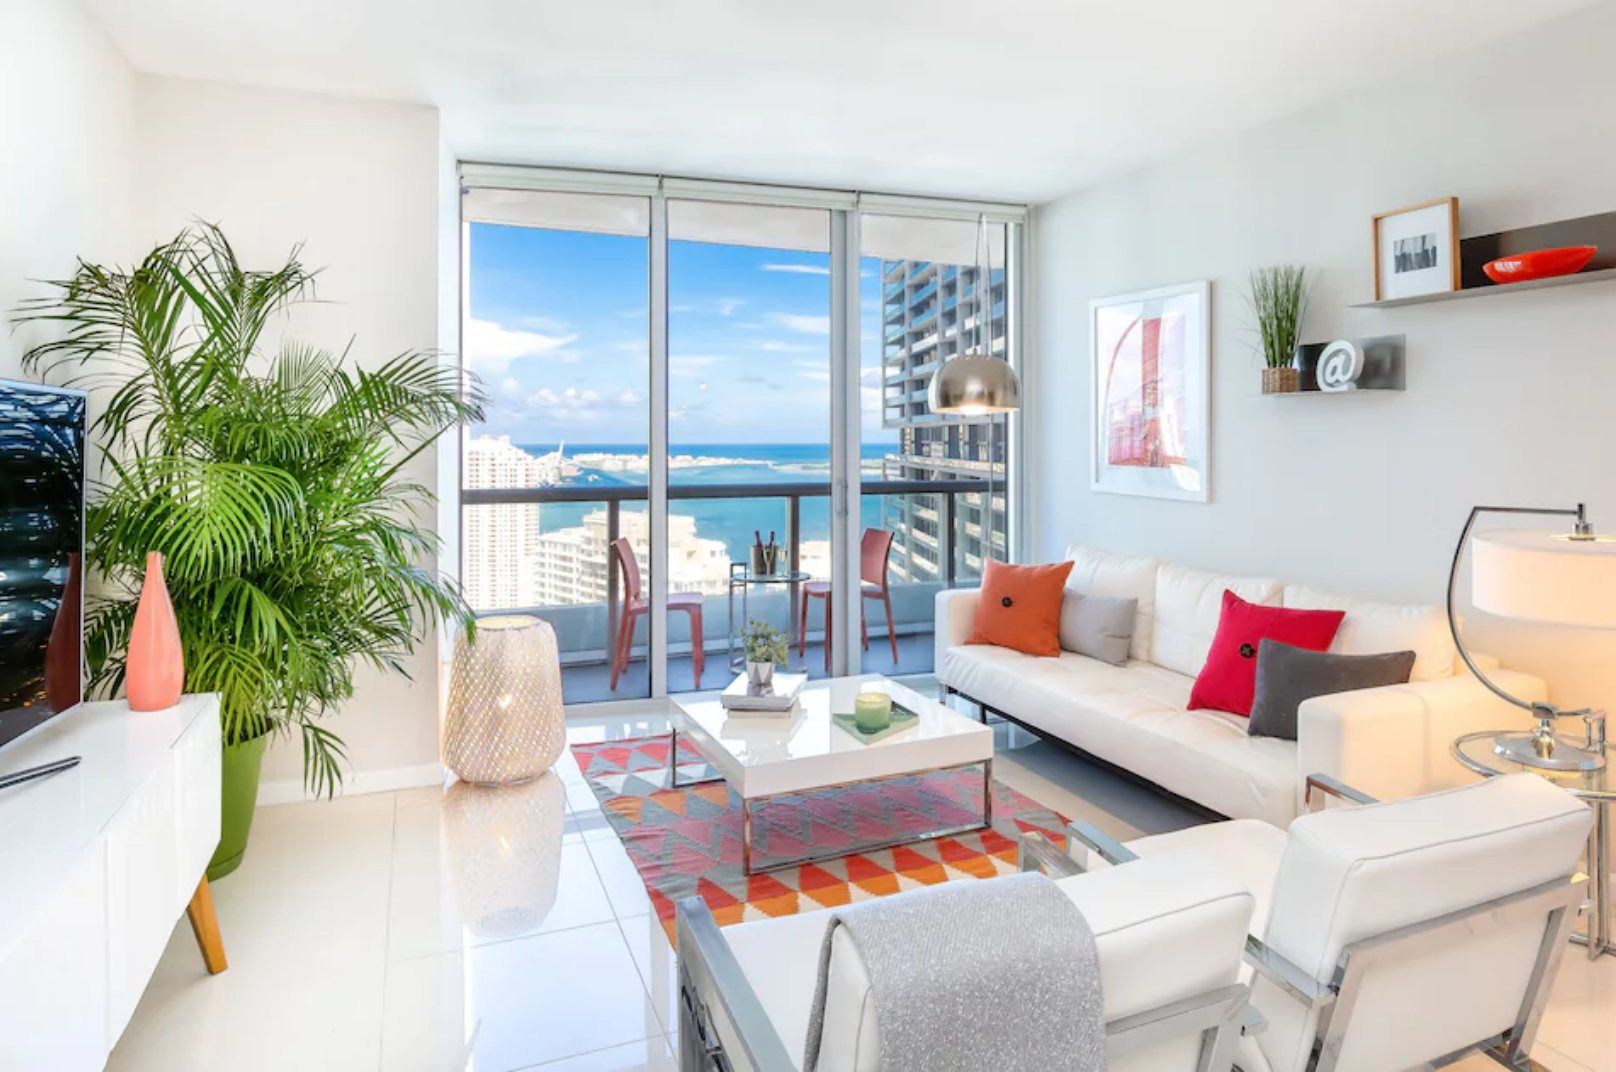 luxury Airbnbs in Miami